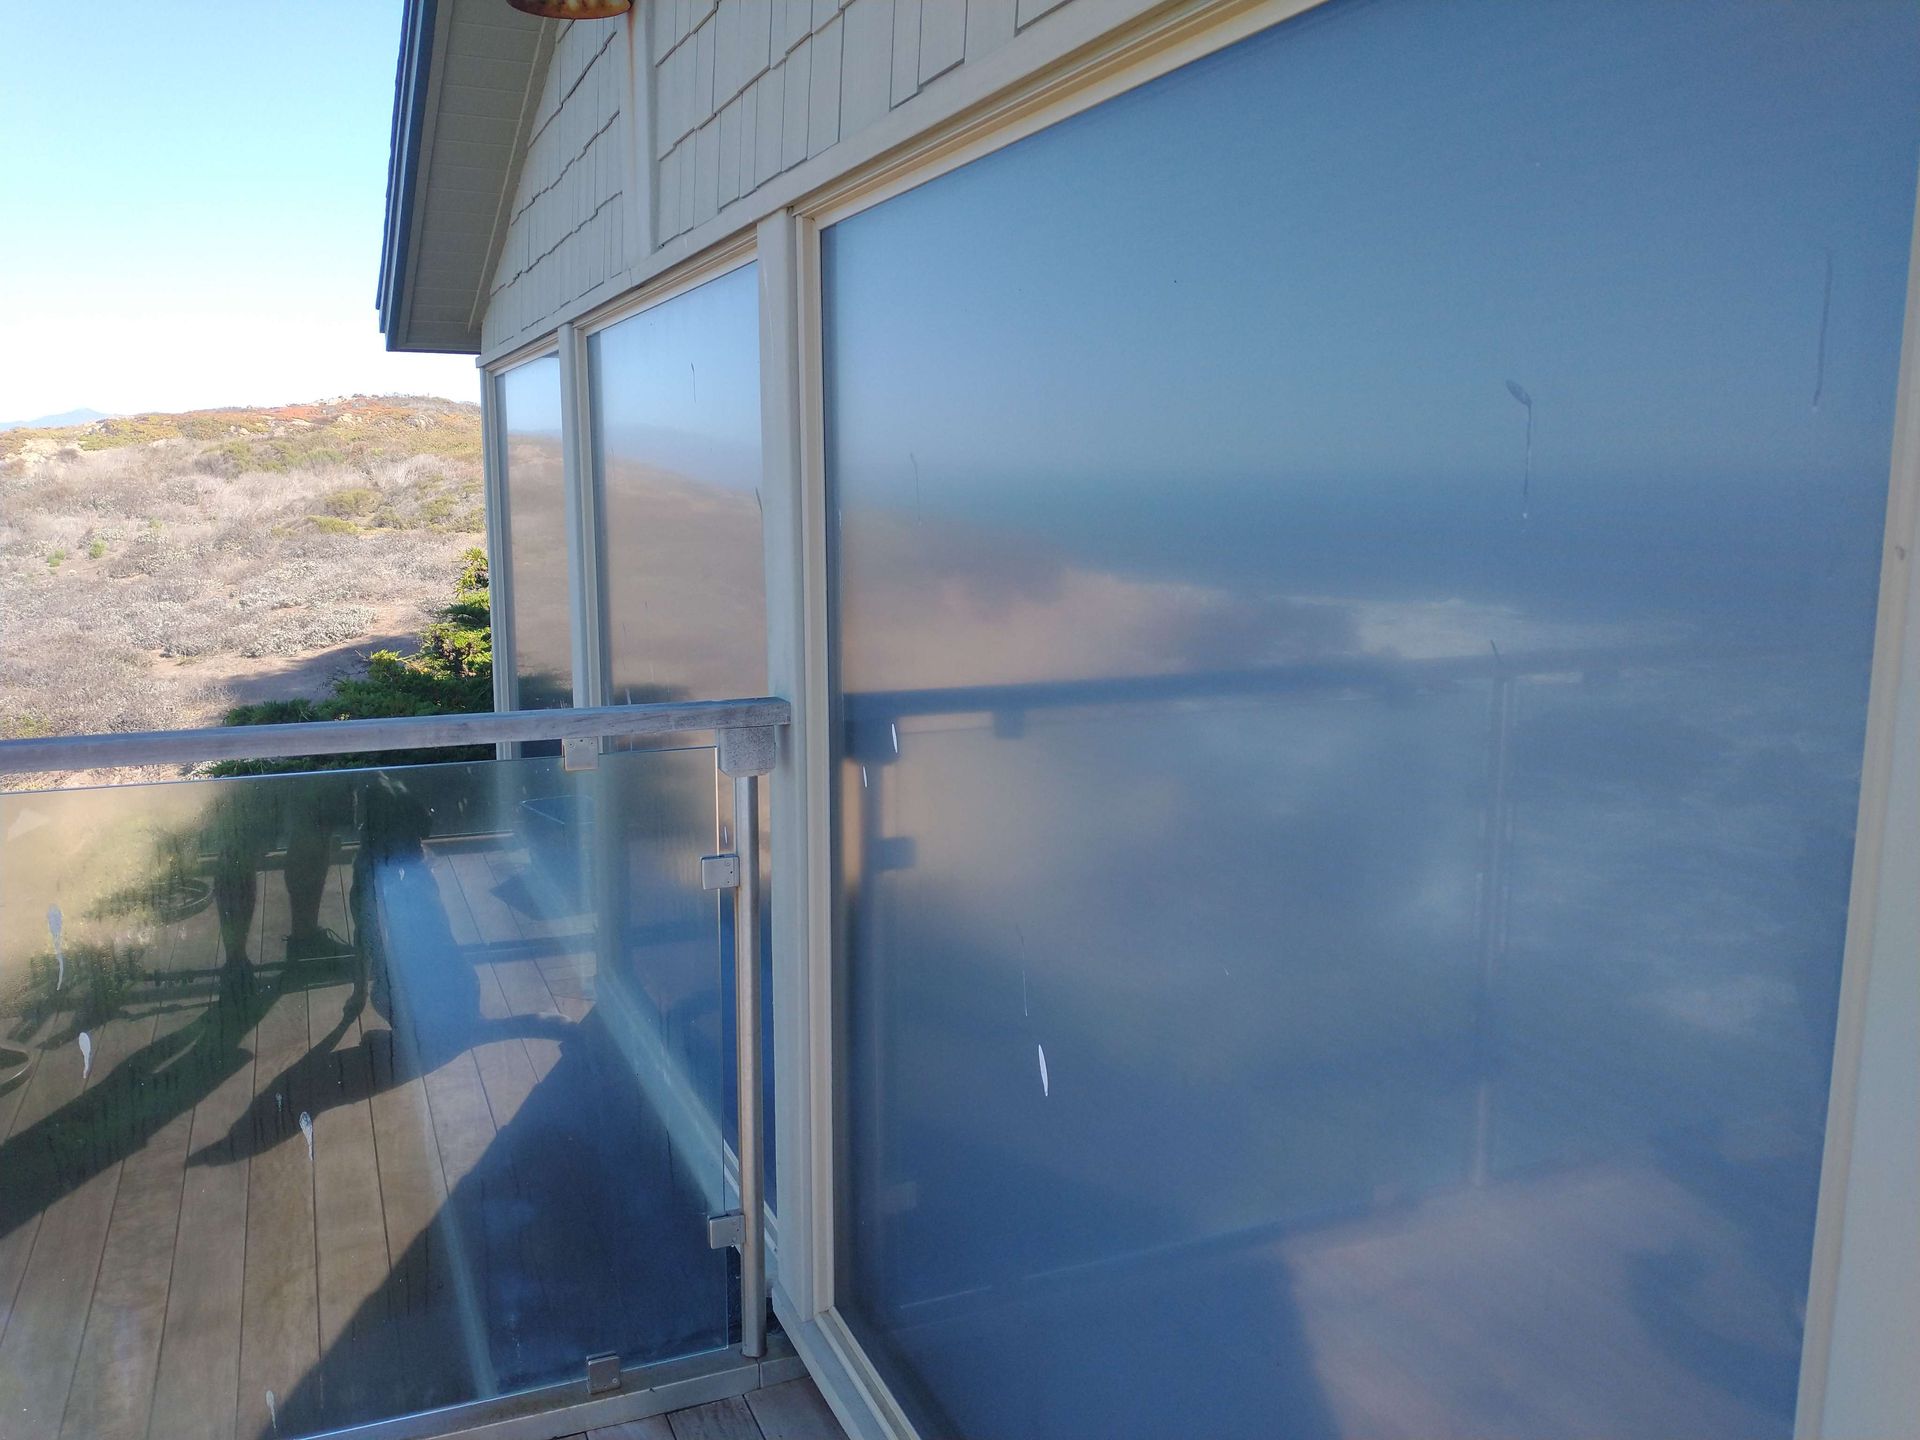 Large window on the side of a building with a view of the ocean.